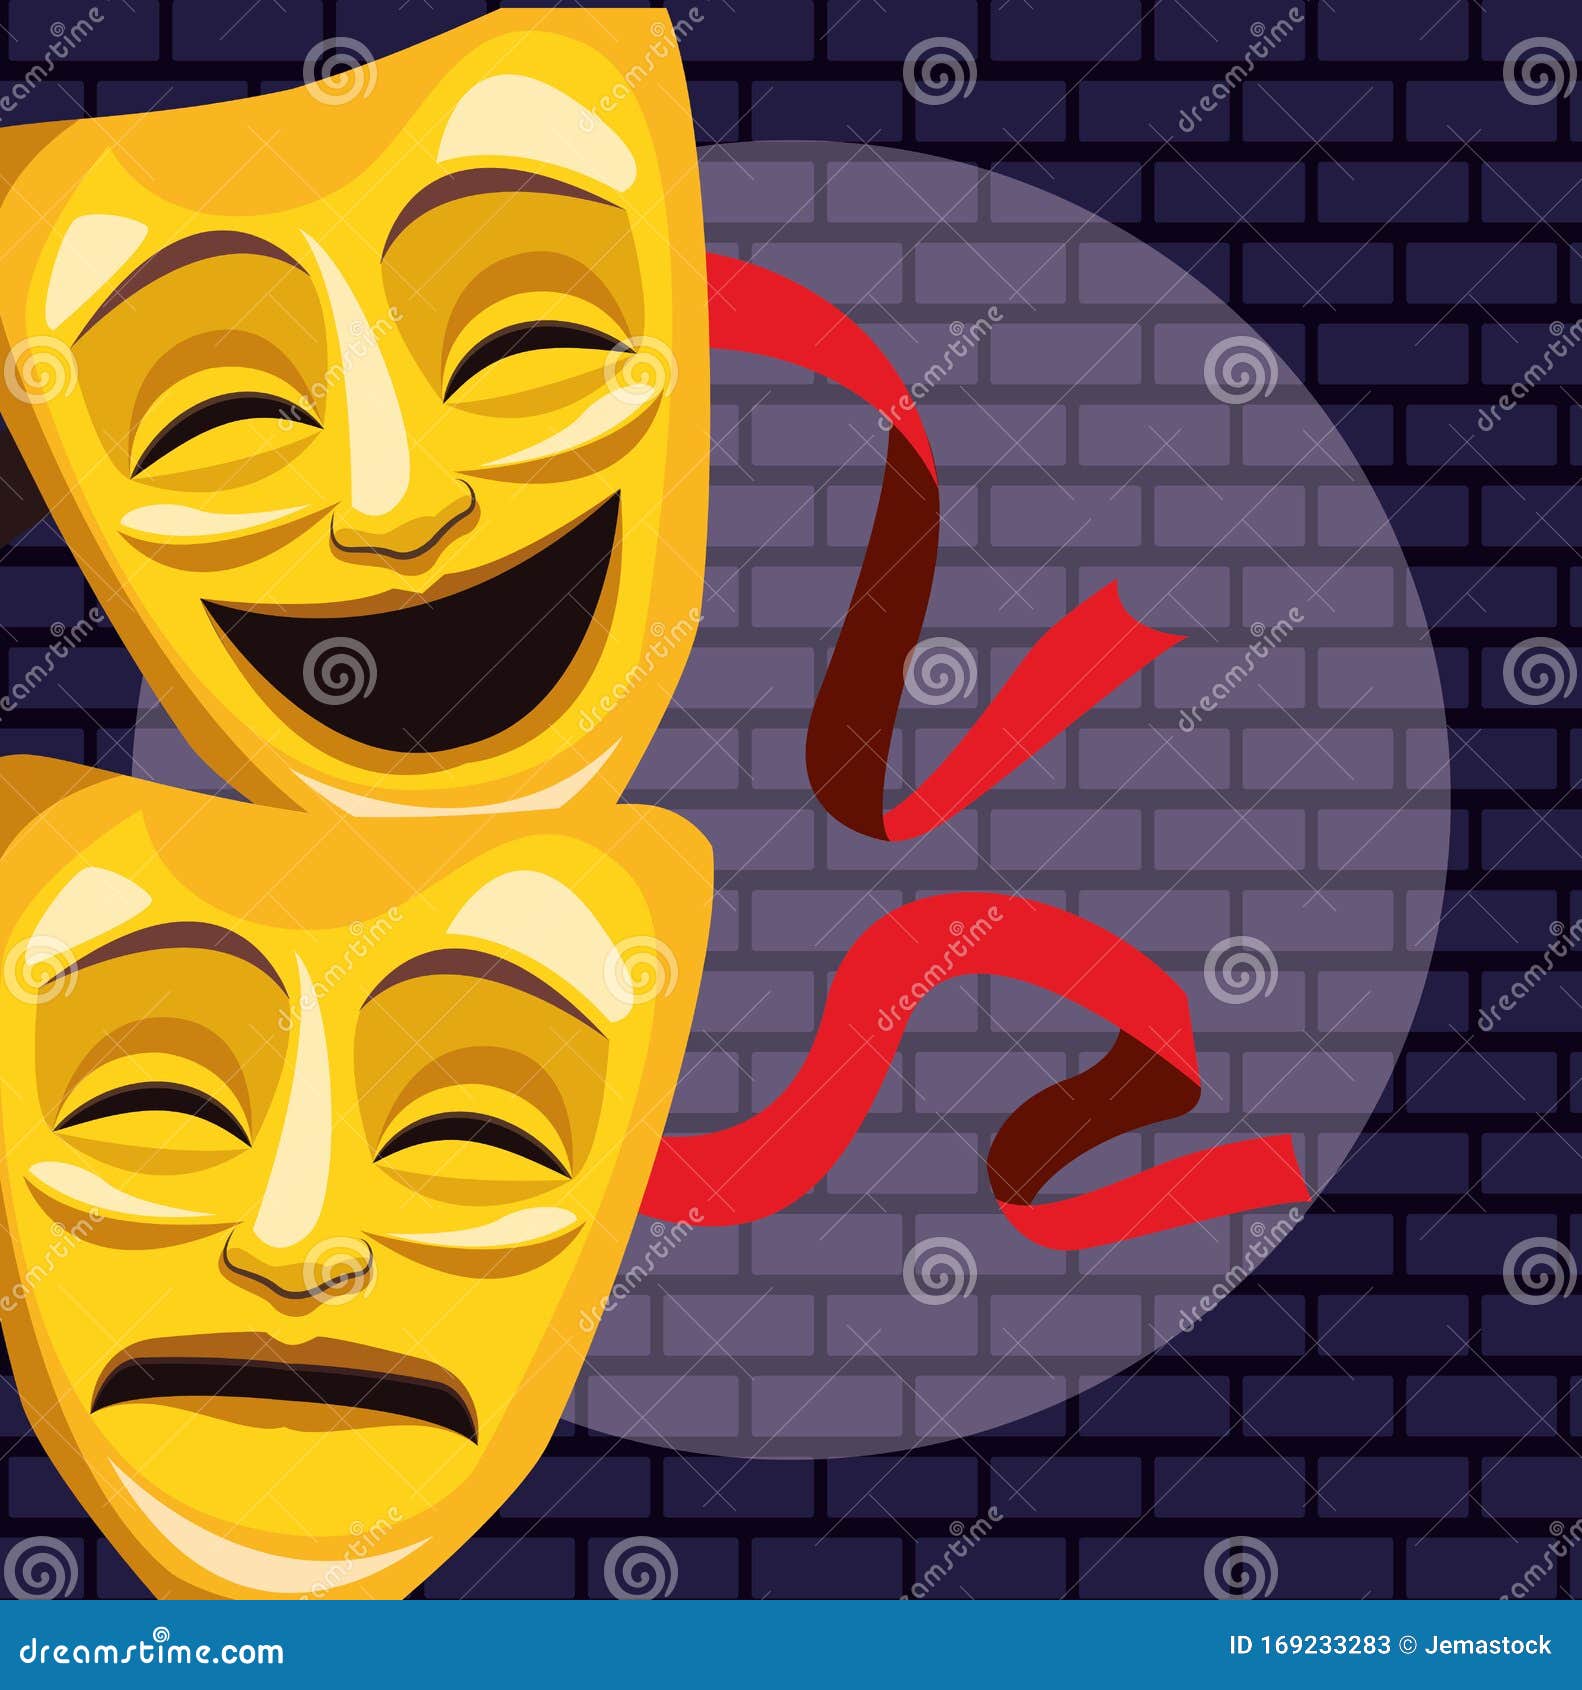 Theatrical Masks Light Wall Brick Stand Up Comedy Show Stock Vector ...